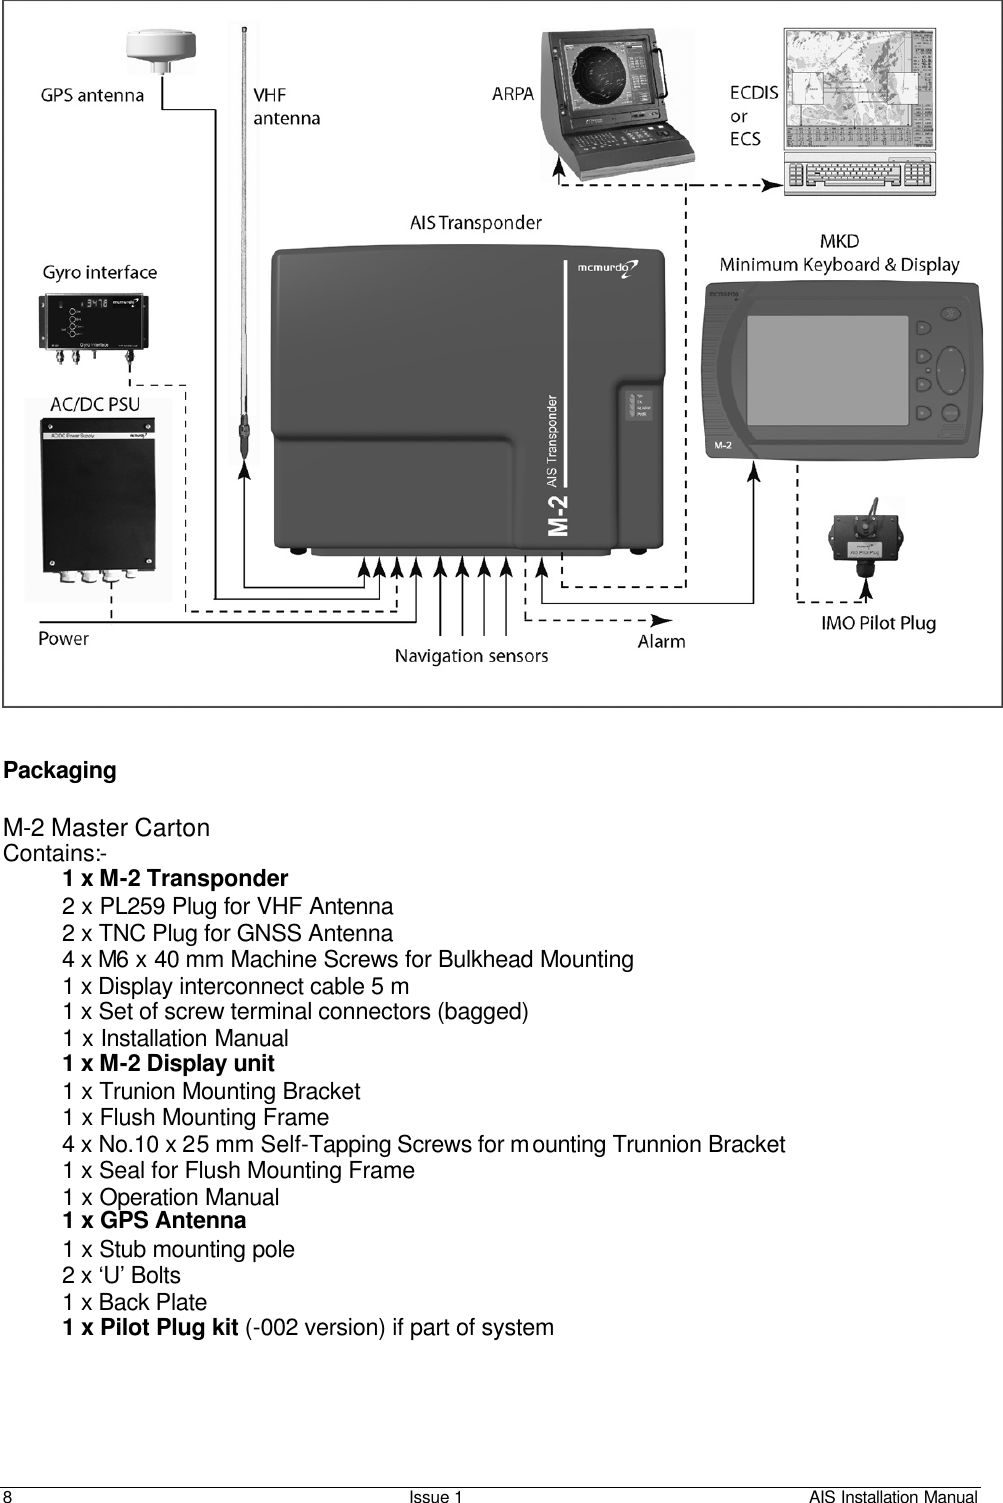    8 Issue 1 AIS Installation Manual       Packaging  M-2 Master Carton        Contains:- 1 x M-2 Transponder        2 x PL259 Plug for VHF Antenna 2 x TNC Plug for GNSS Antenna 4 x M6 x 40 mm Machine Screws for Bulkhead Mounting 1 x Display interconnect cable 5 m 1 x Set of screw terminal connectors (bagged) 1 x Installation Manual    1 x M-2 Display unit 1 x Trunion Mounting Bracket 1 x Flush Mounting Frame 4 x No.10 x 25 mm Self-Tapping Screws for mounting Trunnion Bracket 1 x Seal for Flush Mounting Frame 1 x Operation Manual   1 x GPS Antenna 1 x Stub mounting pole 2 x ‘U’ Bolts 1 x Back Plate 1 x Pilot Plug kit (-002 version) if part of system     